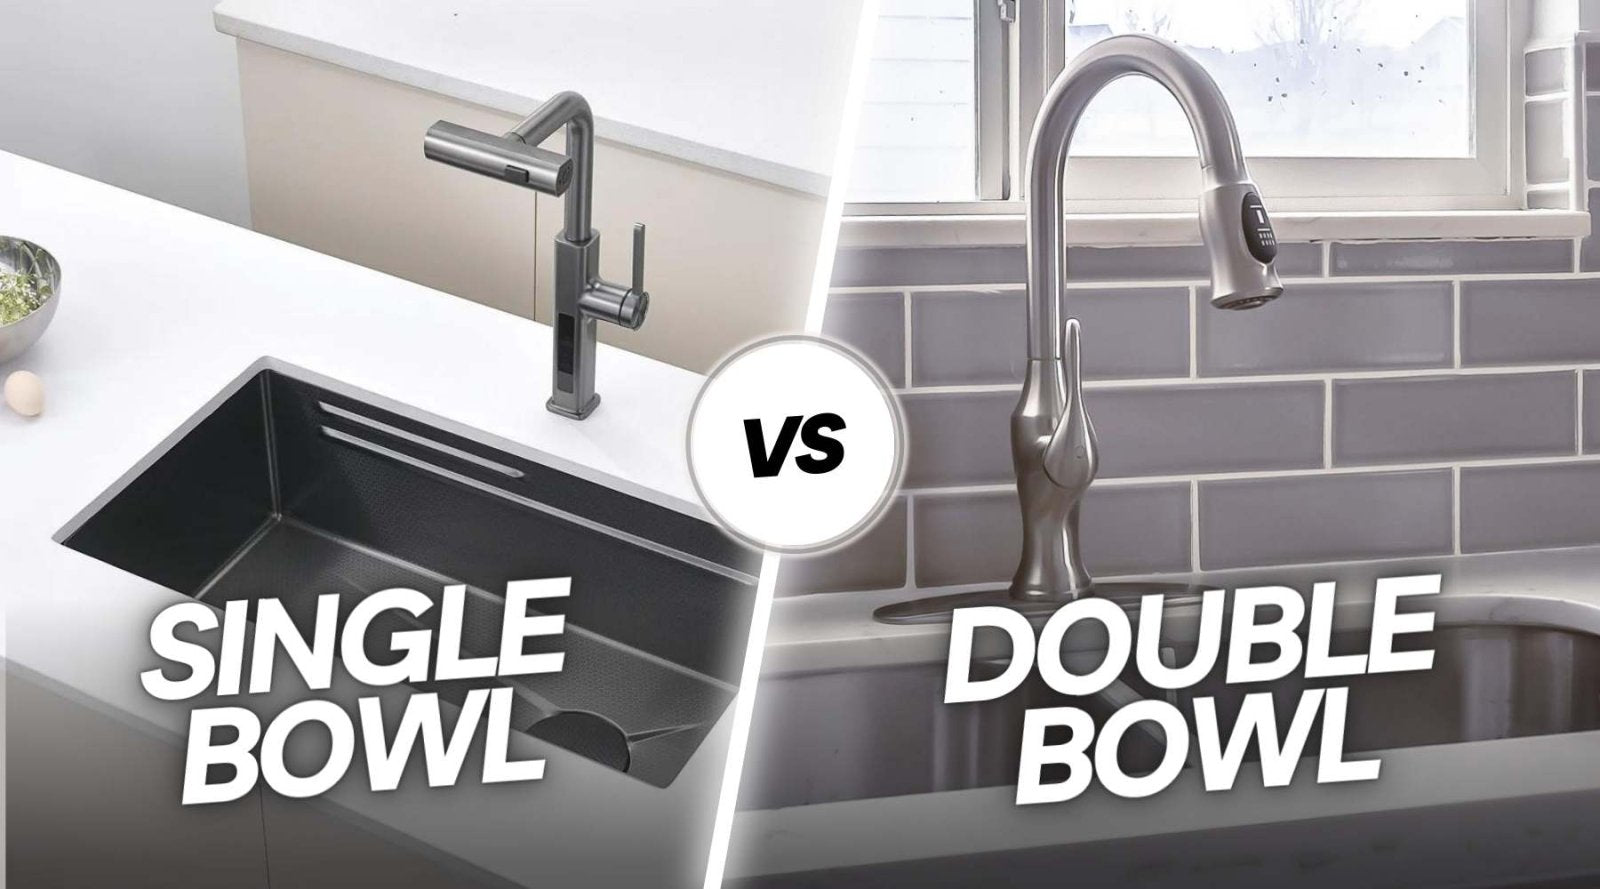 Single Vs Double Bowl Kitchen Sink: Which Is Better? - Lefton Home